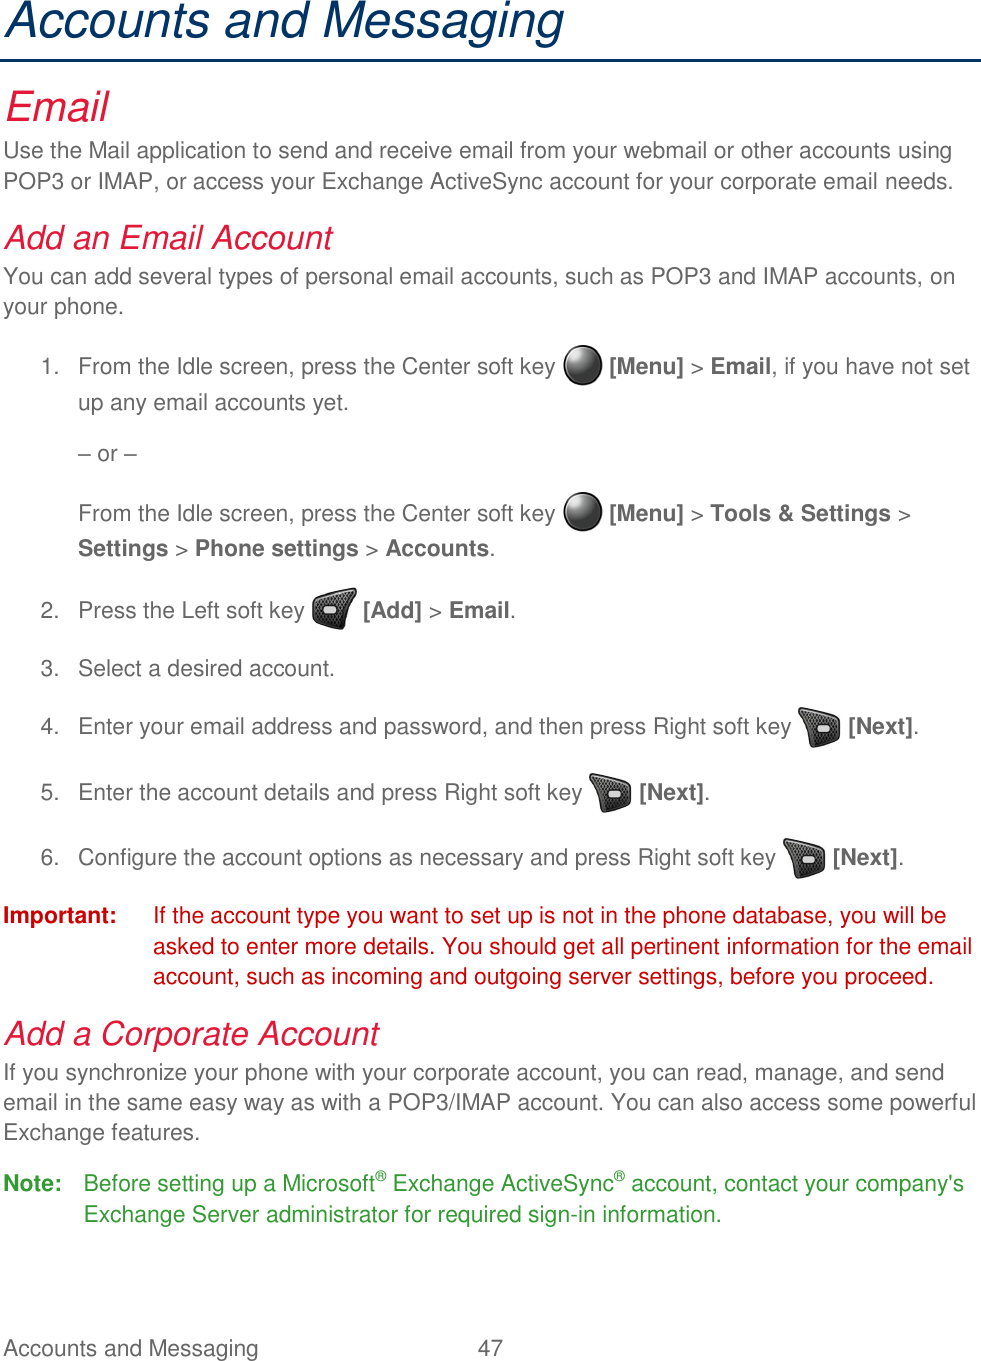 Accounts and Messaging  47   Accounts and Messaging Email Use the Mail application to send and receive email from your webmail or other accounts using POP3 or IMAP, or access your Exchange ActiveSync account for your corporate email needs. Add an Email Account You can add several types of personal email accounts, such as POP3 and IMAP accounts, on your phone.   From the Idle screen, press the Center soft key   [Menu] &gt; Email, if you have not set 1.up any email accounts yet. – or – From the Idle screen, press the Center soft key   [Menu] &gt; Tools &amp; Settings &gt; Settings &gt; Phone settings &gt; Accounts.   Press the Left soft key   [Add] &gt; Email. 2.  Select a desired account. 3.  Enter your email address and password, and then press Right soft key   [Next]. 4.  Enter the account details and press Right soft key   [Next]. 5.  Configure the account options as necessary and press Right soft key   [Next]. 6.Important:  If the account type you want to set up is not in the phone database, you will be asked to enter more details. You should get all pertinent information for the email account, such as incoming and outgoing server settings, before you proceed. Add a Corporate Account If you synchronize your phone with your corporate account, you can read, manage, and send email in the same easy way as with a POP3/IMAP account. You can also access some powerful Exchange features. Note:  Before setting up a Microsoft® Exchange ActiveSync® account, contact your company&apos;s Exchange Server administrator for required sign-in information. 